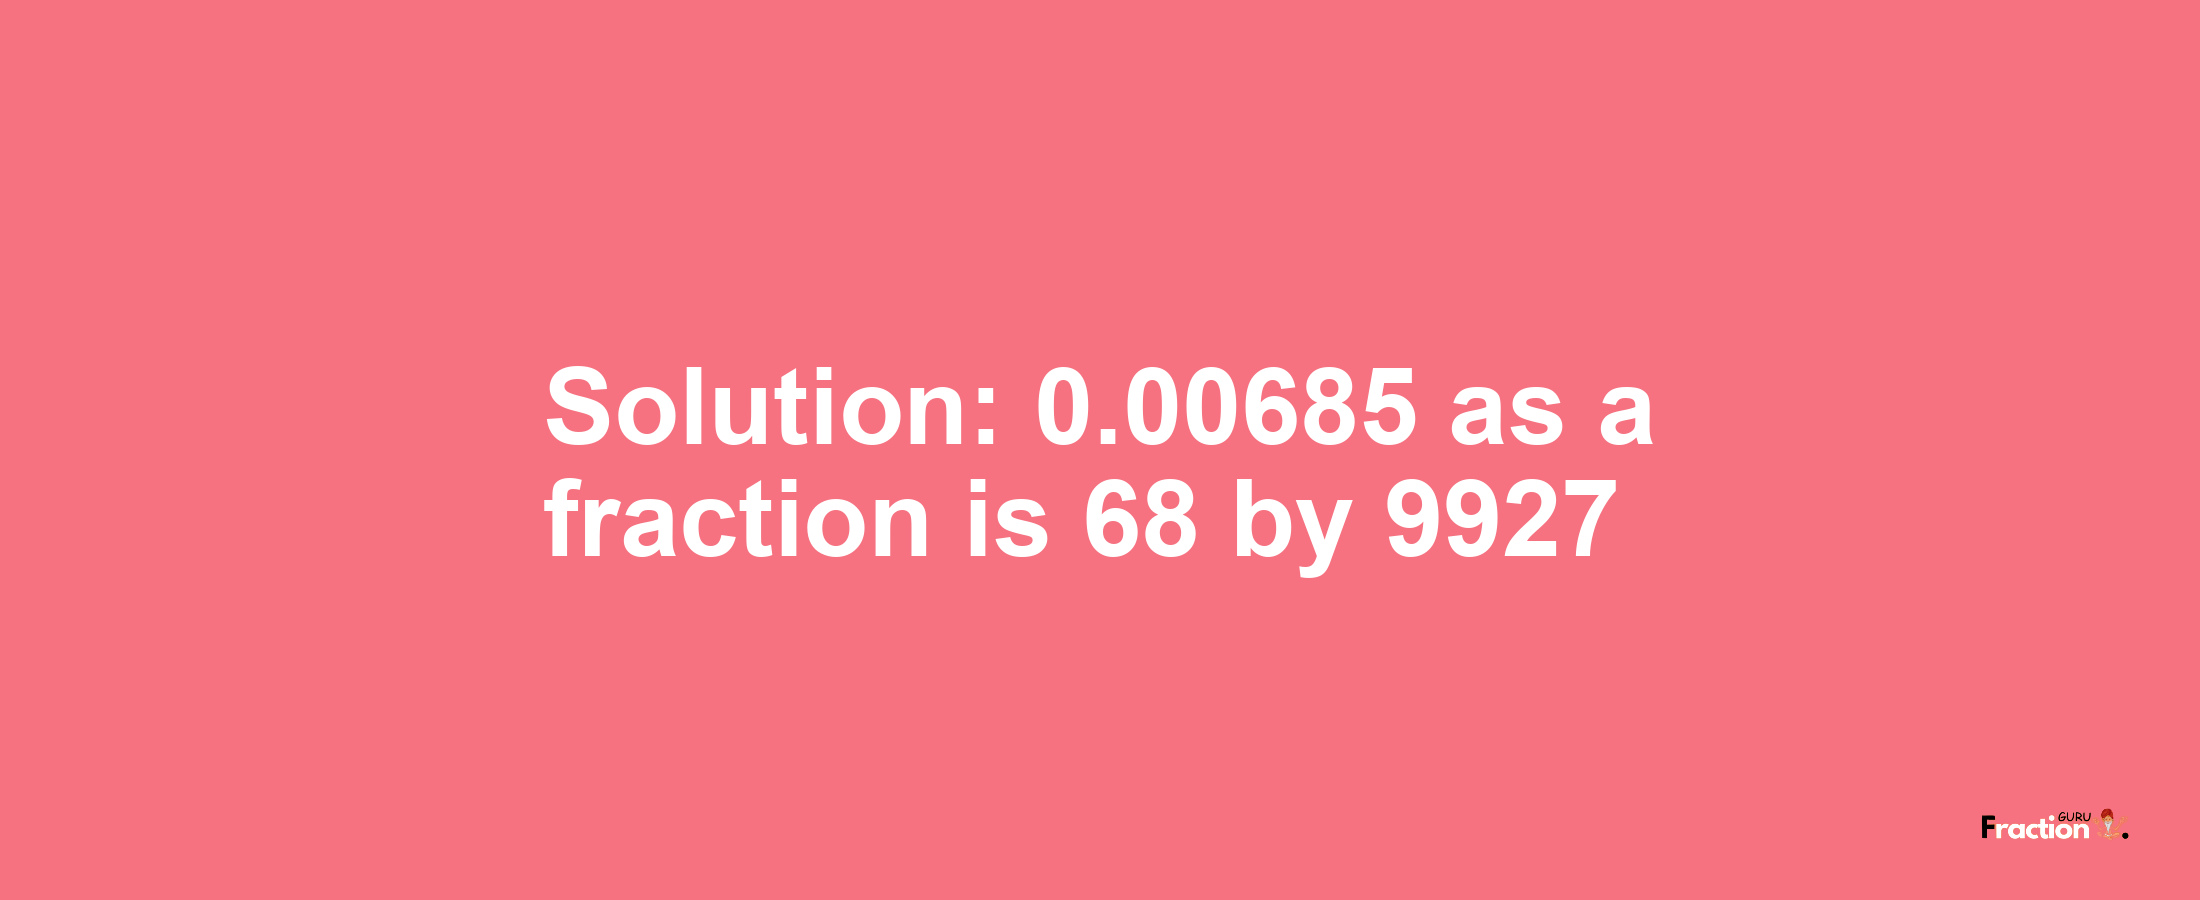 Solution:0.00685 as a fraction is 68/9927